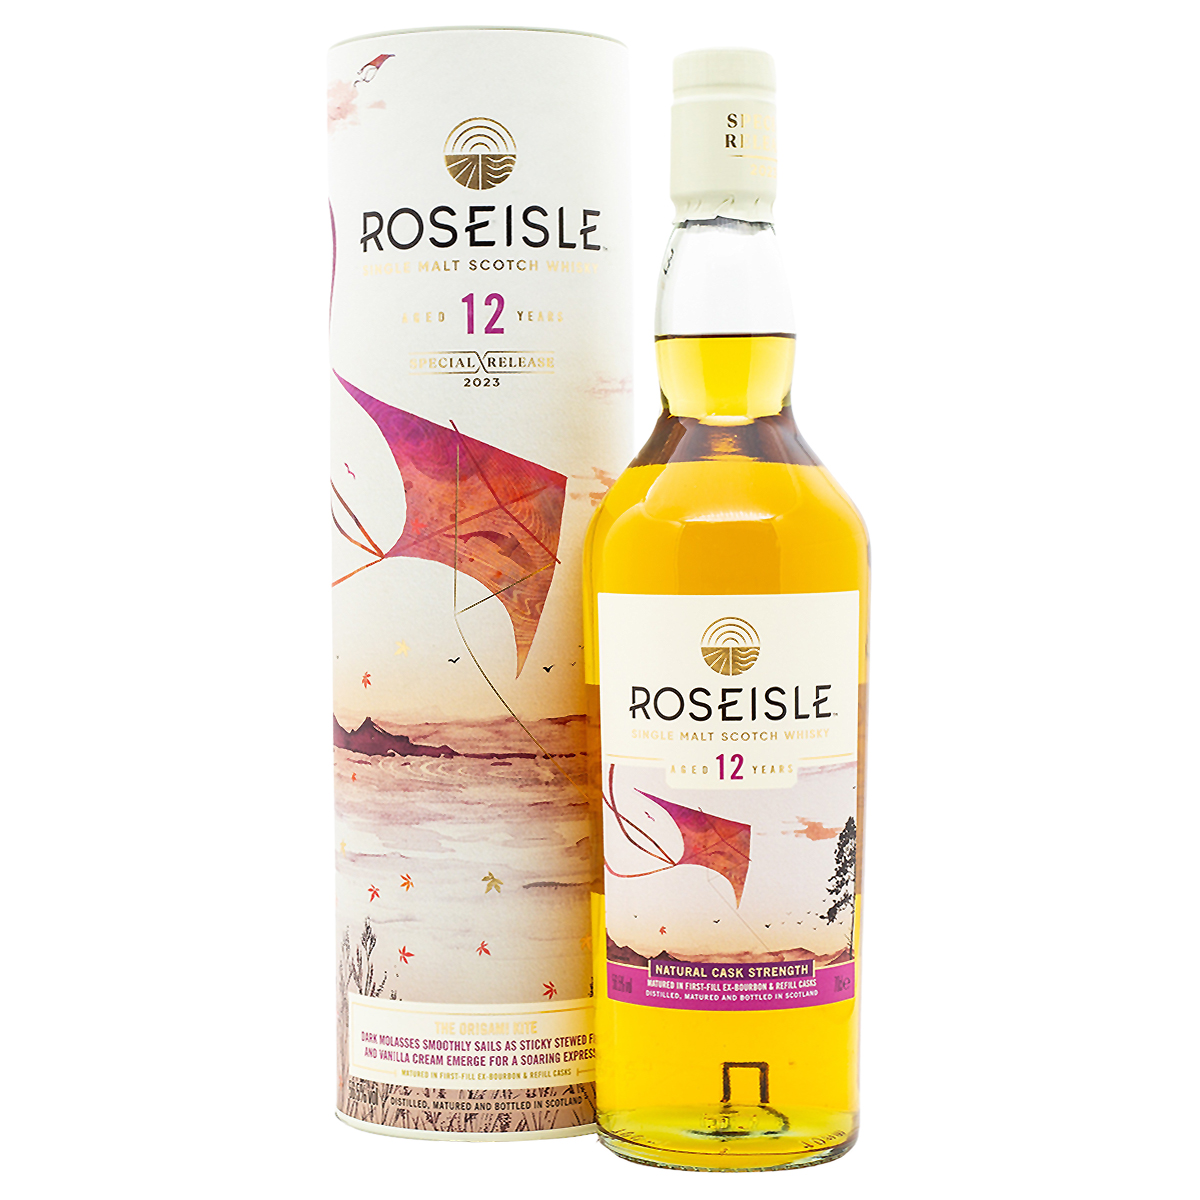 Roseisle 12 Years The Origami Kite Diageo Special Release 2023